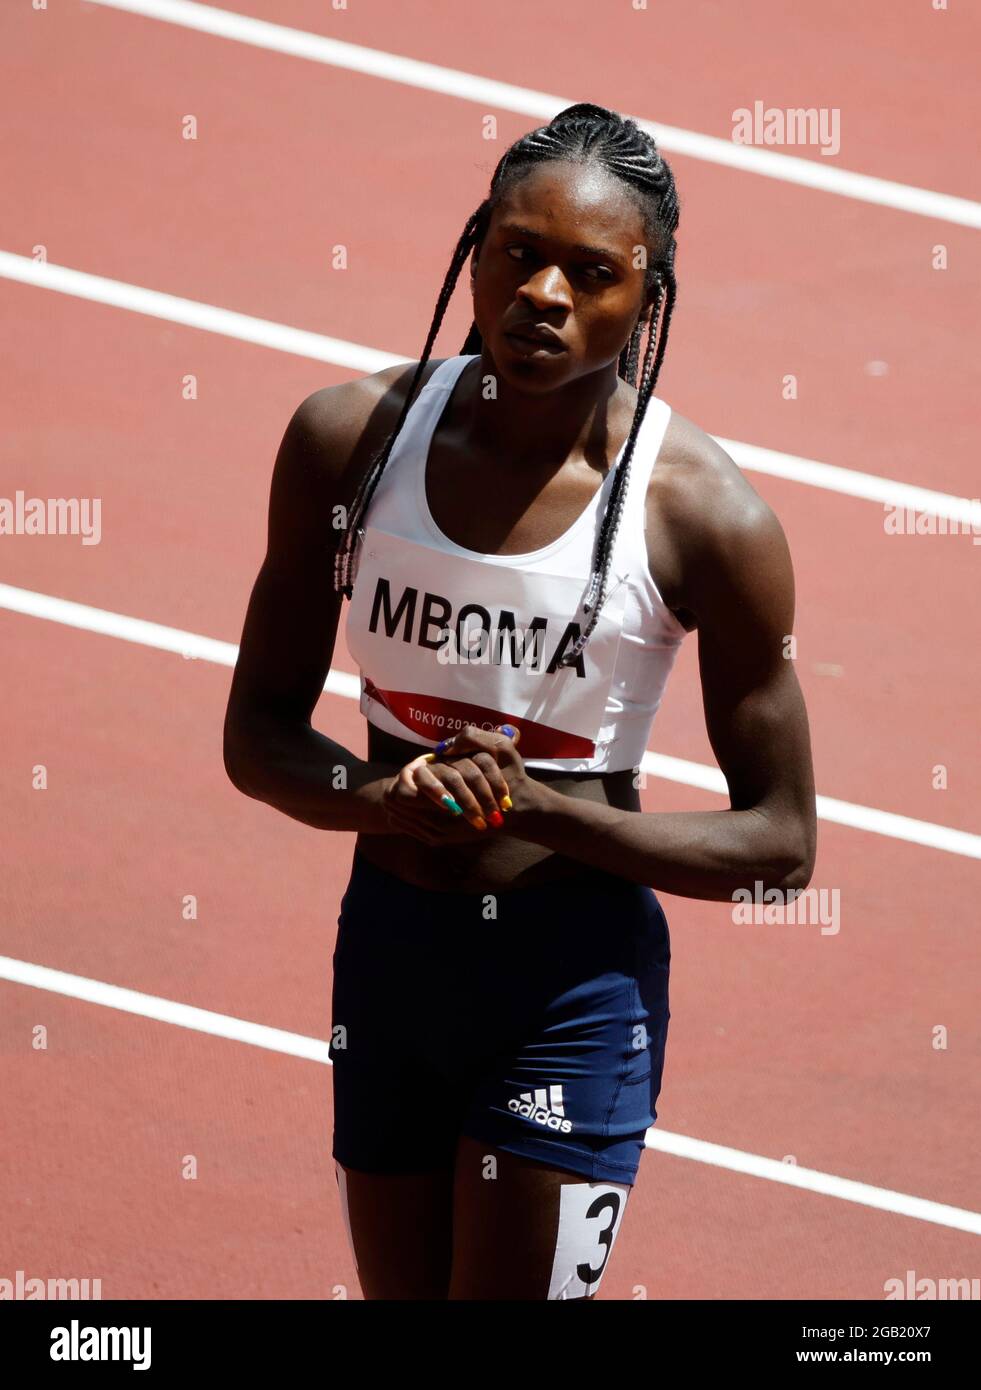 Tokyo 2020 Olympics - Athletics - Women's 200m - Round 1 - Olympic Stadium,  Tokyo, Japan - August 2, 2021. Christine Mboma of Namibia reacts after  competing and finishing first in Heat 4 REUTERS/Phil Noble Stock Photo -  Alamy